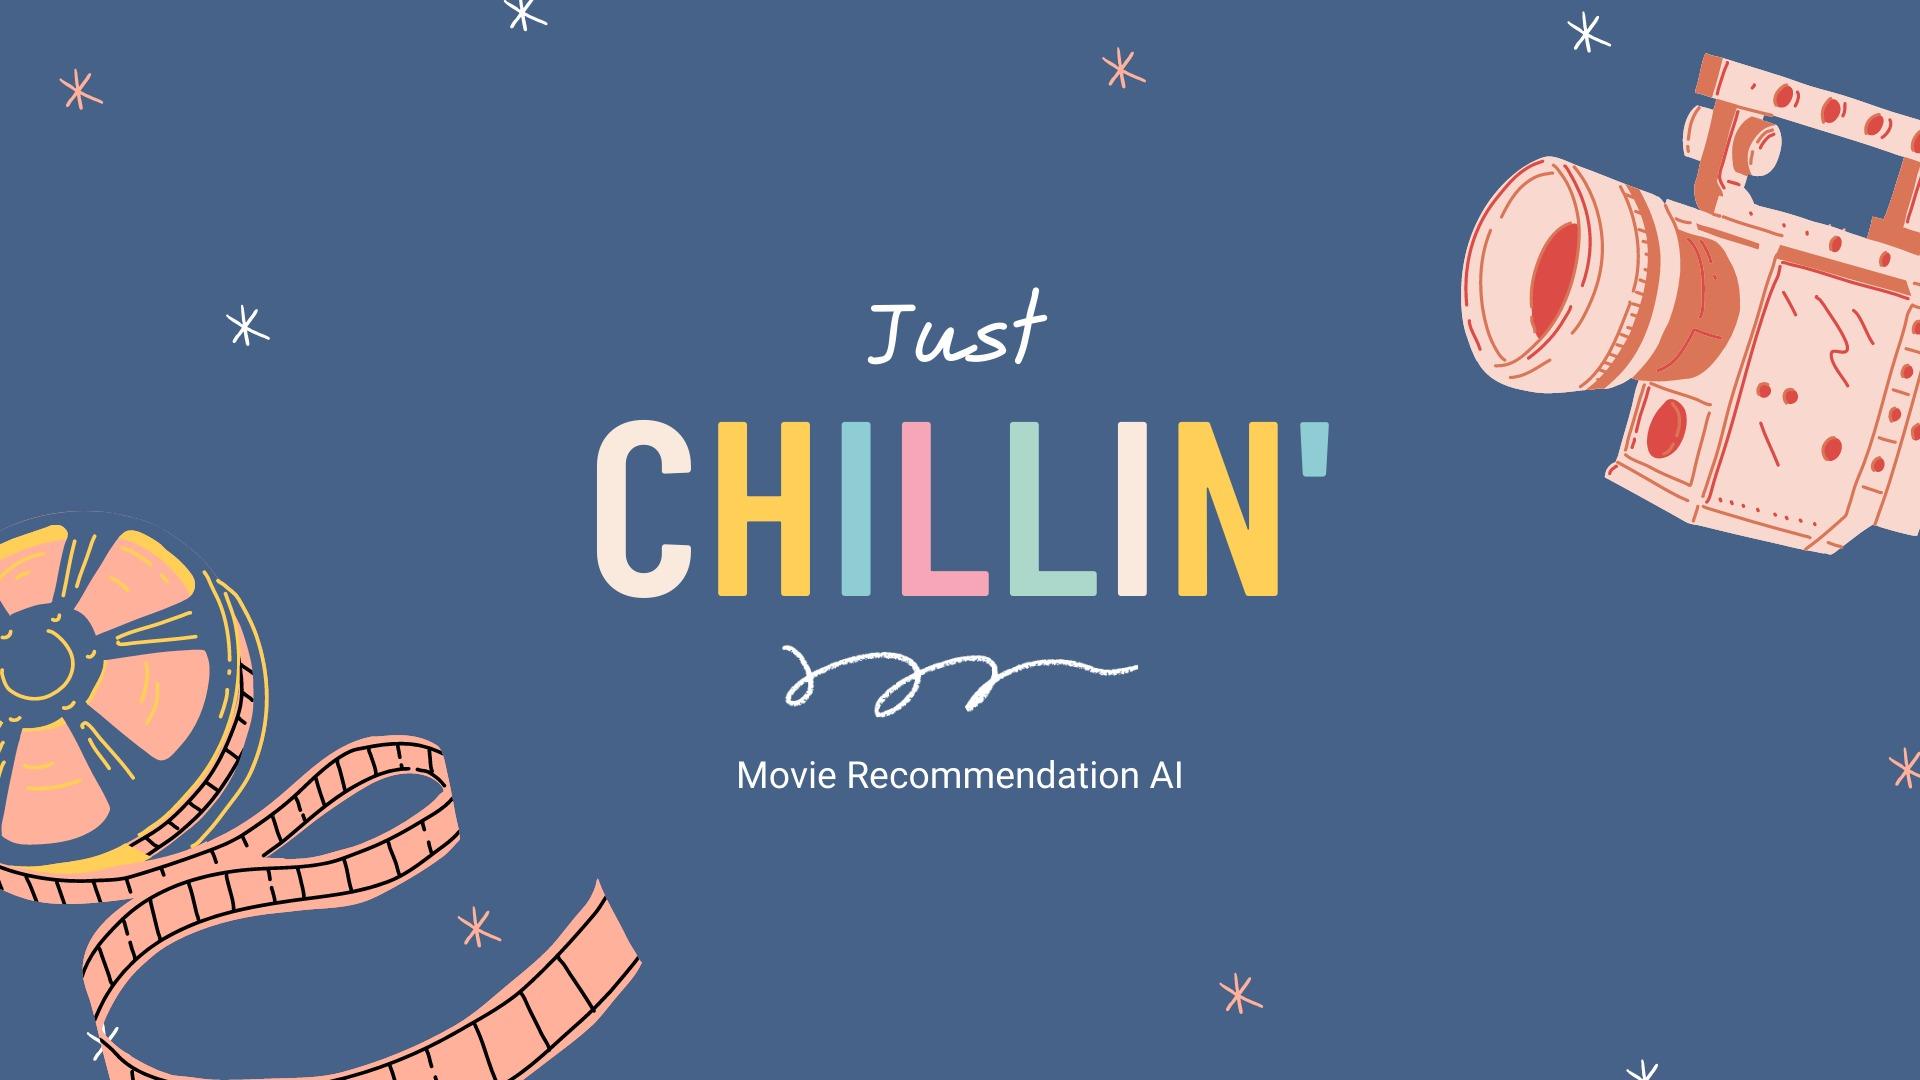 Movie Recommendations